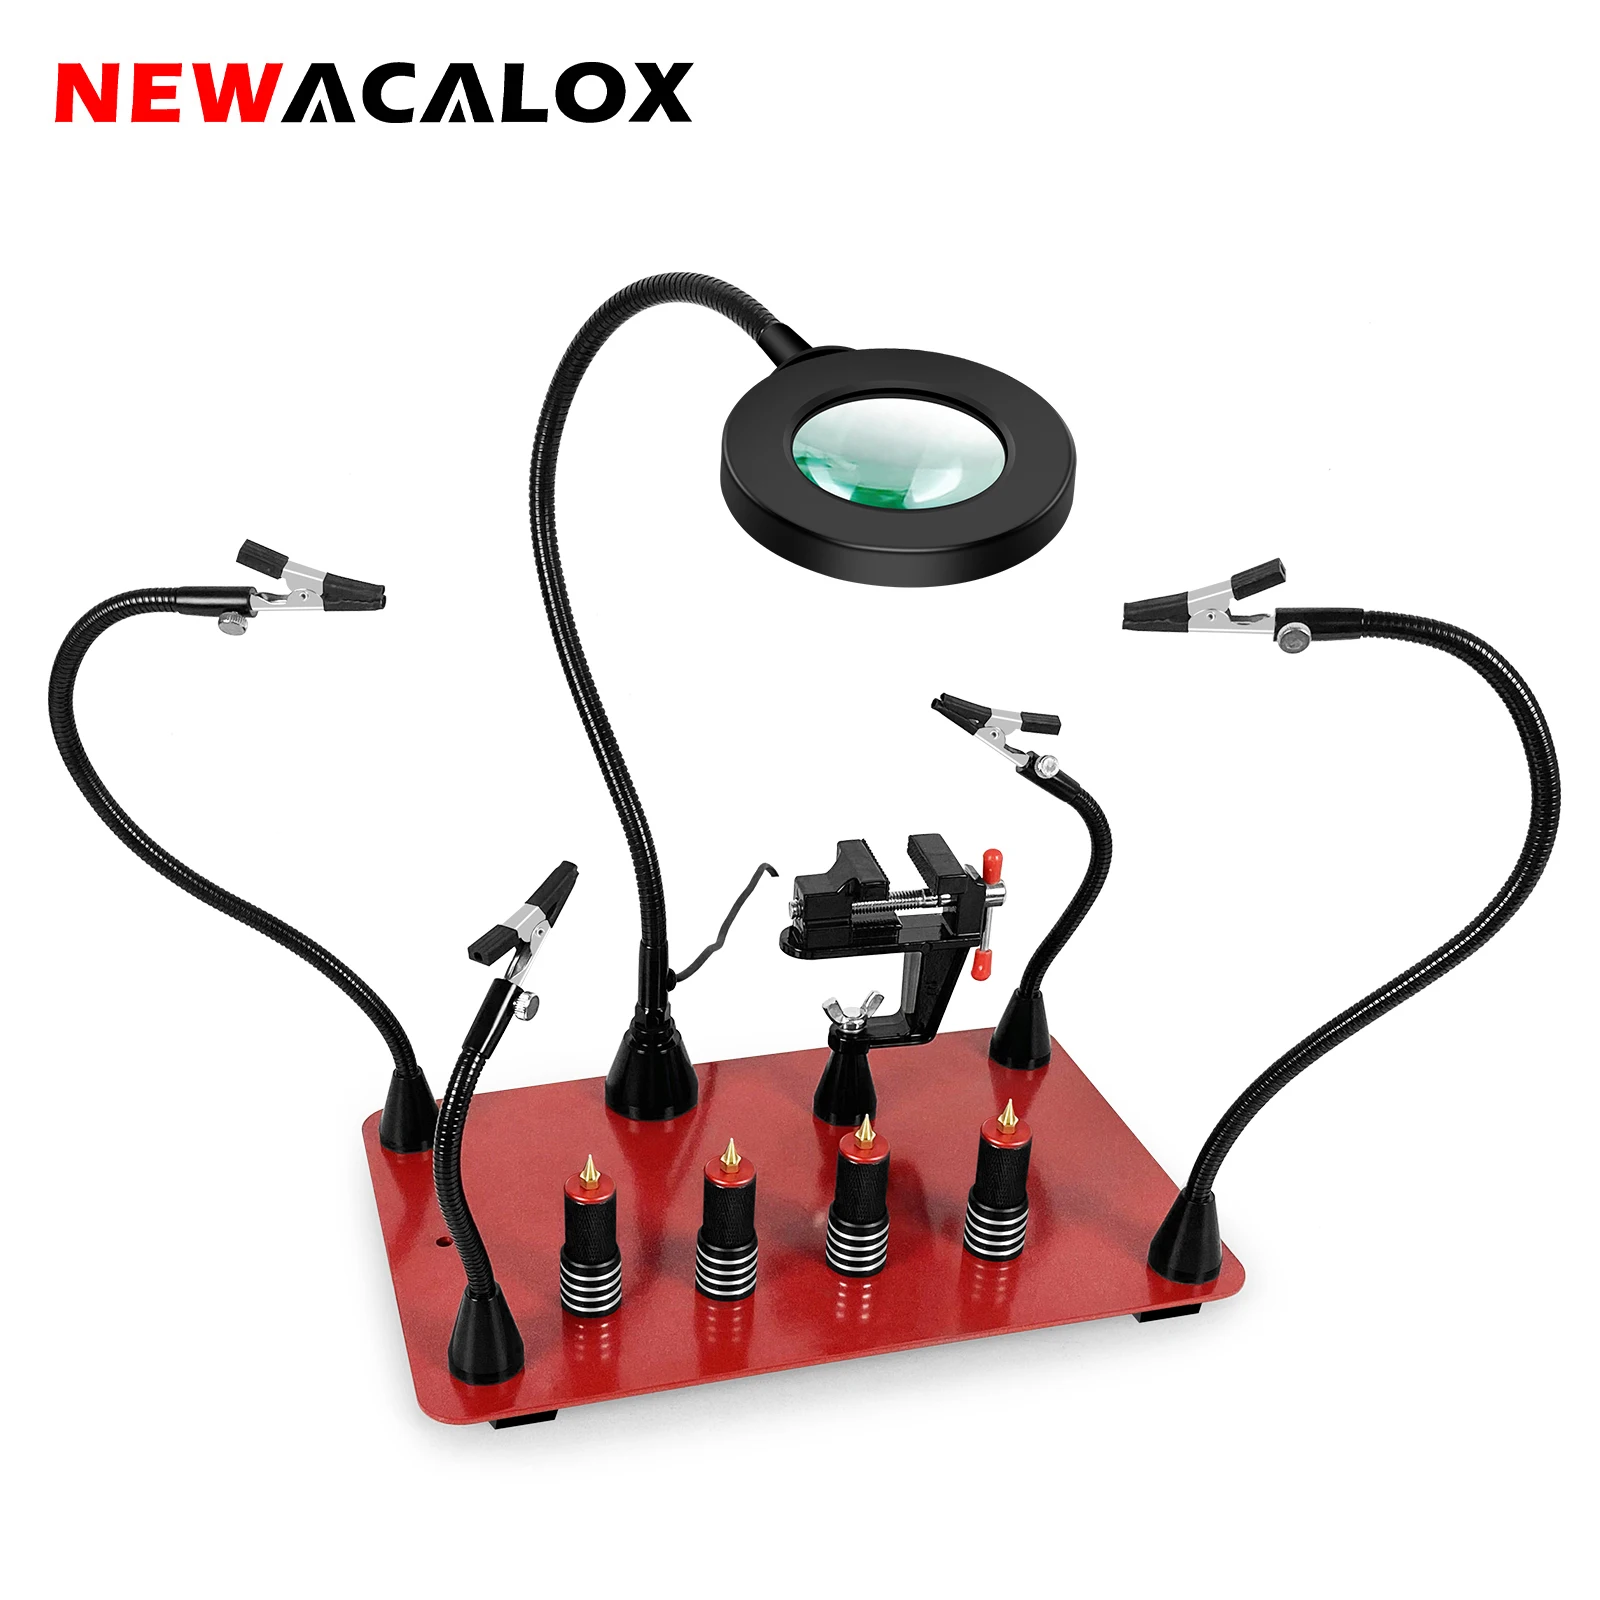 NEWACALOX  Magnetic Soldering Third Hand PCB Holder Heat Gun Stand with 3X LED Magnifying Glass Heavy Duty Welding Workstation newacalox circuit board holder adjustable 360°degree flipping with 3x magnifying glass lamp for clamping pcb soldering repair